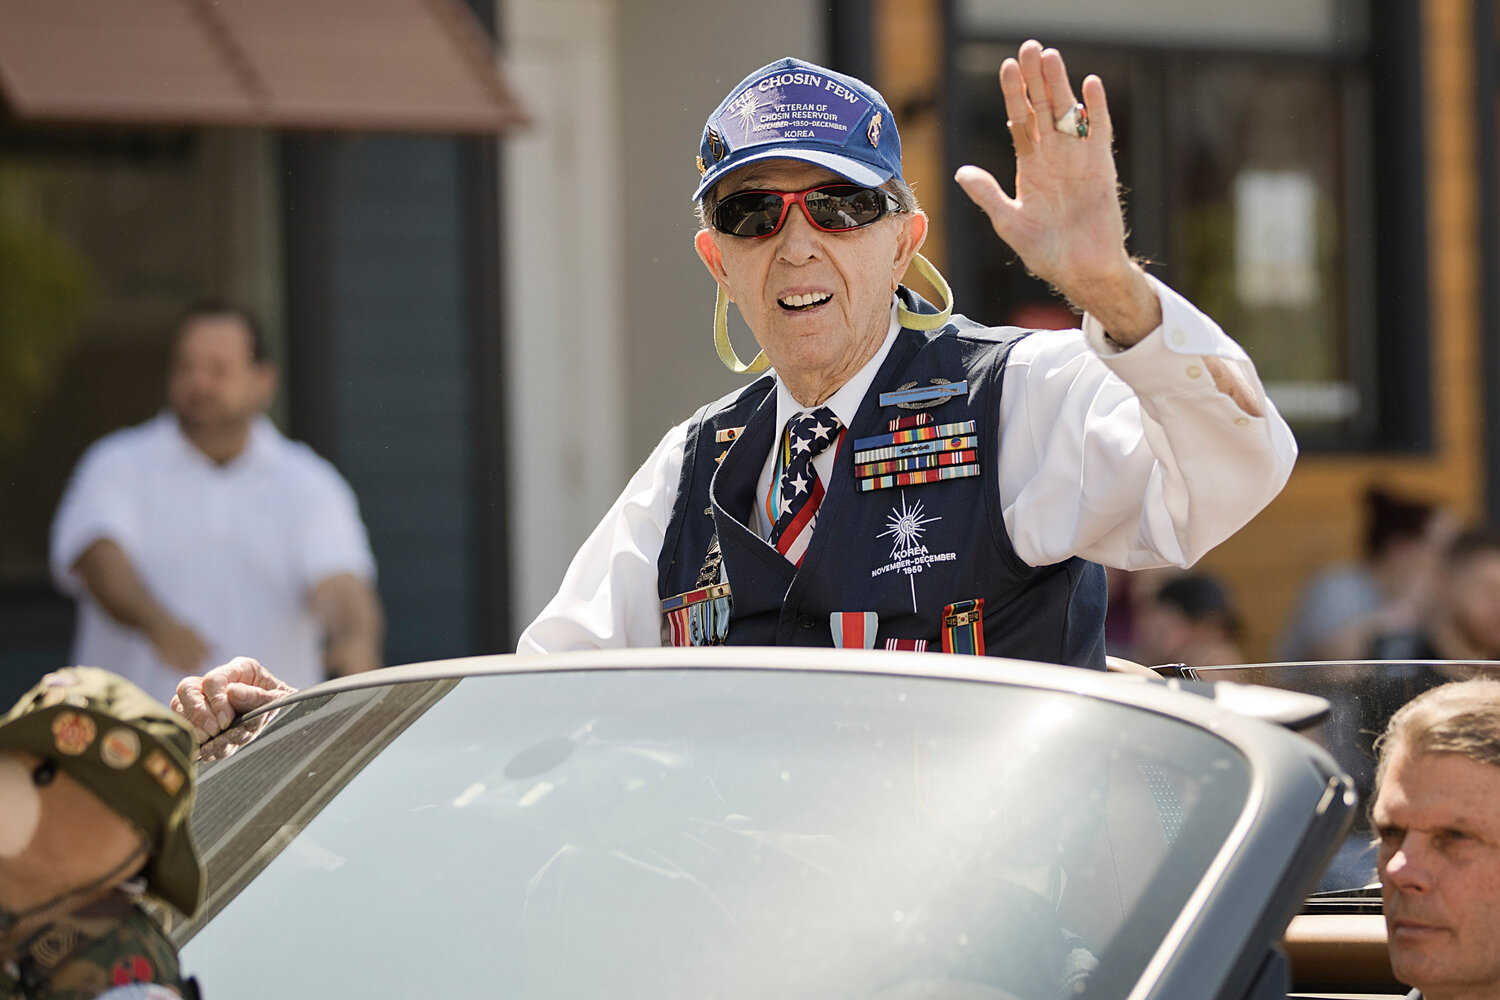 Thomas Dailey, Battle of the Chosin Reservoir, offers a wave while participating in the Memorial Day parade.